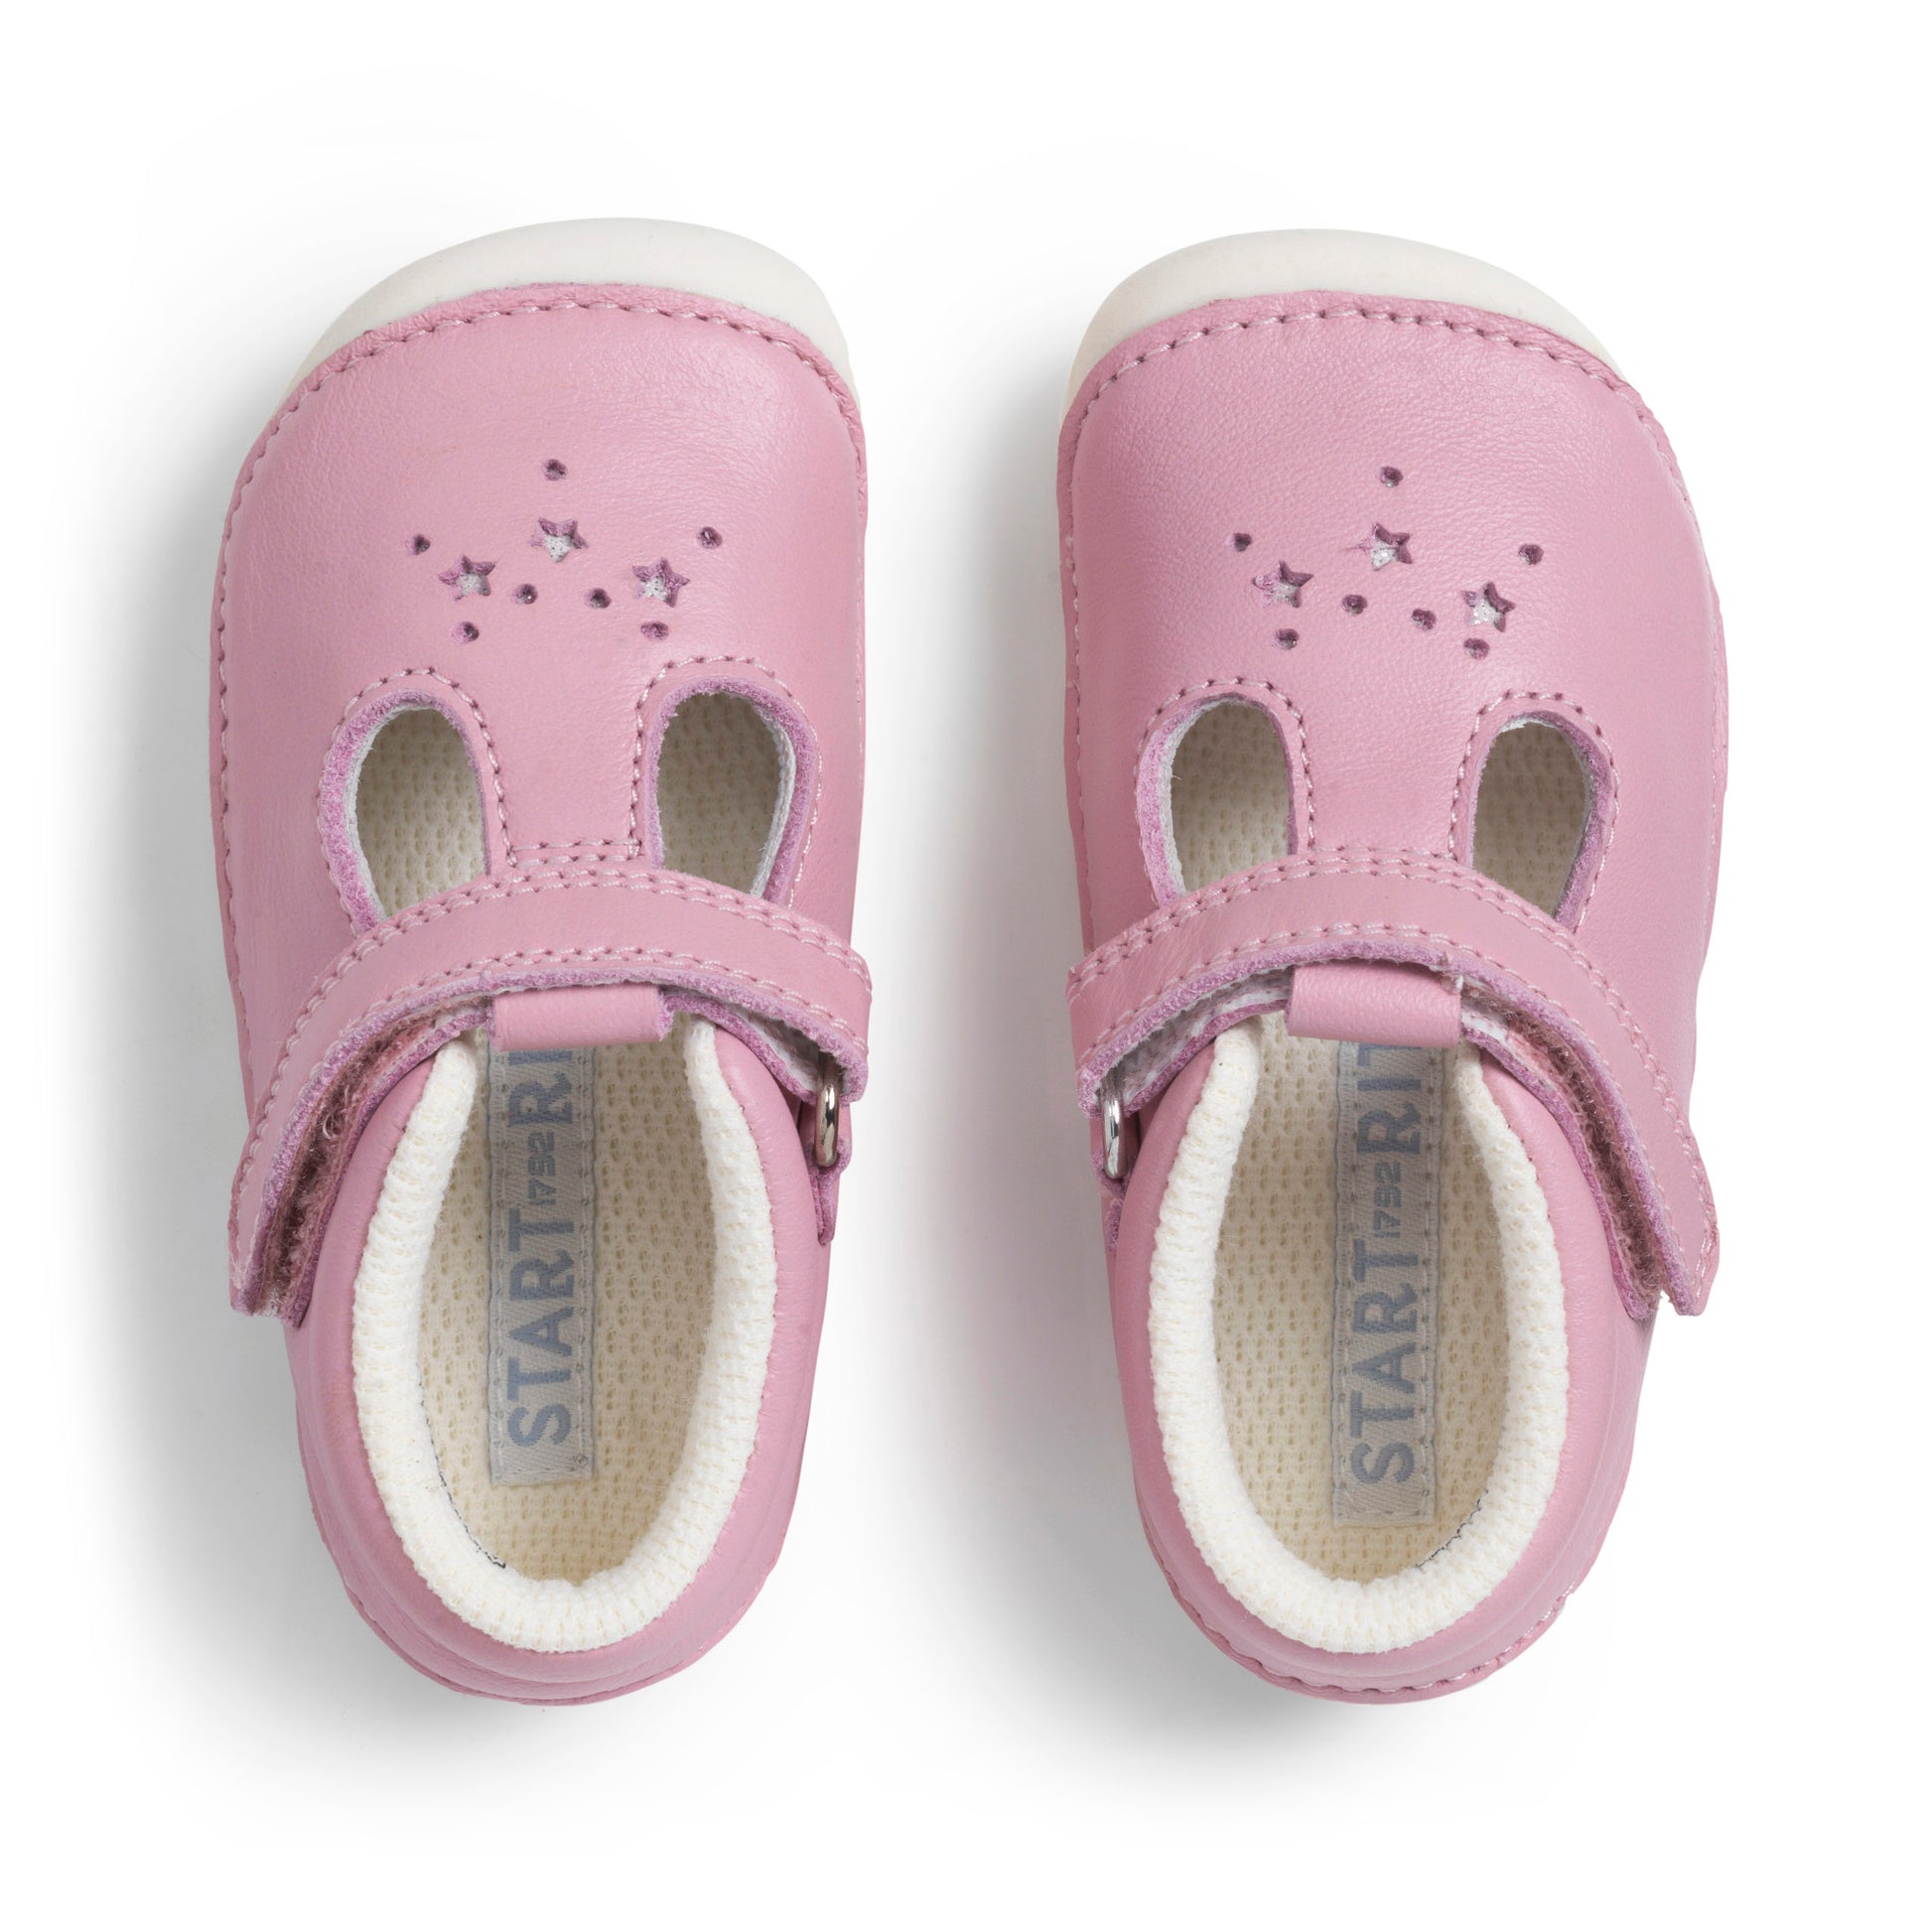 A girls pre-walker by Start-Rite ,style Tumble, in pink leather with velcro fastening. Top view of a pair.